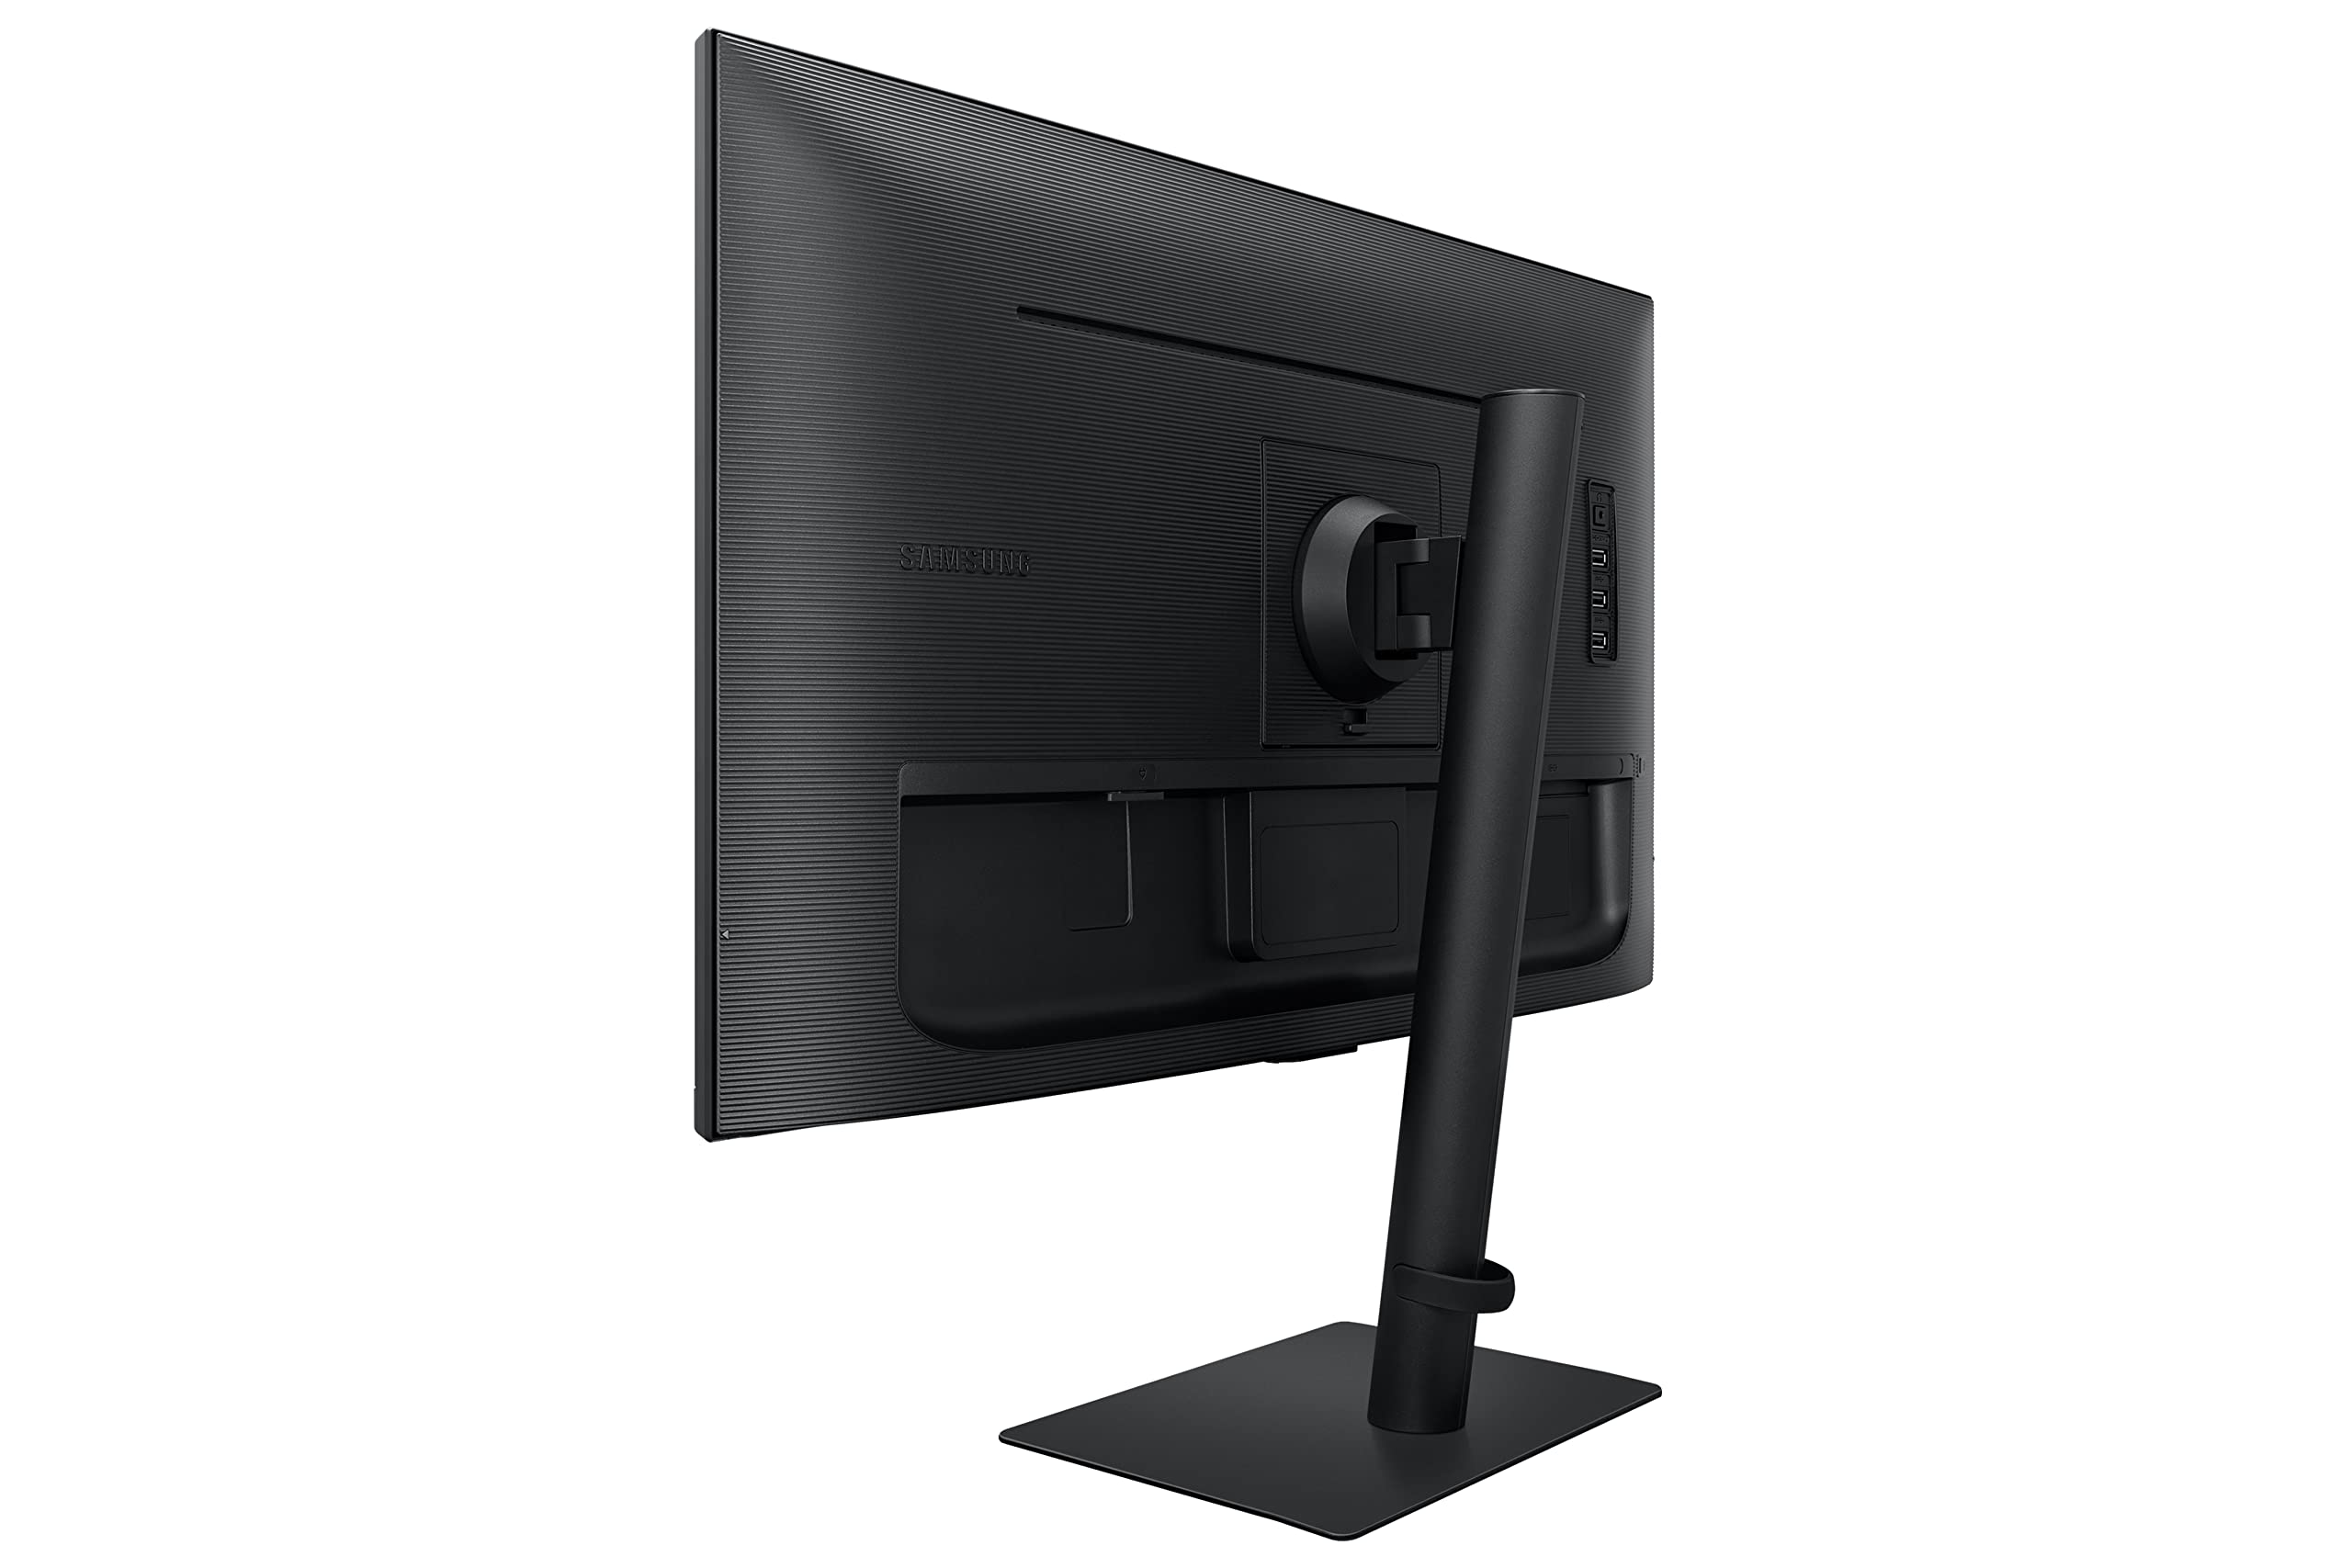 SAMSUNG S80UA 27-Inch ViewFinity 4K UHD (3840x2160) Computer Monitor, HDMI, USB Hub with USB-C, HDR10 (1 Billion Colors), Built-in Speakers, Height Adjustable Stand (LS27A80DUNNXZA)